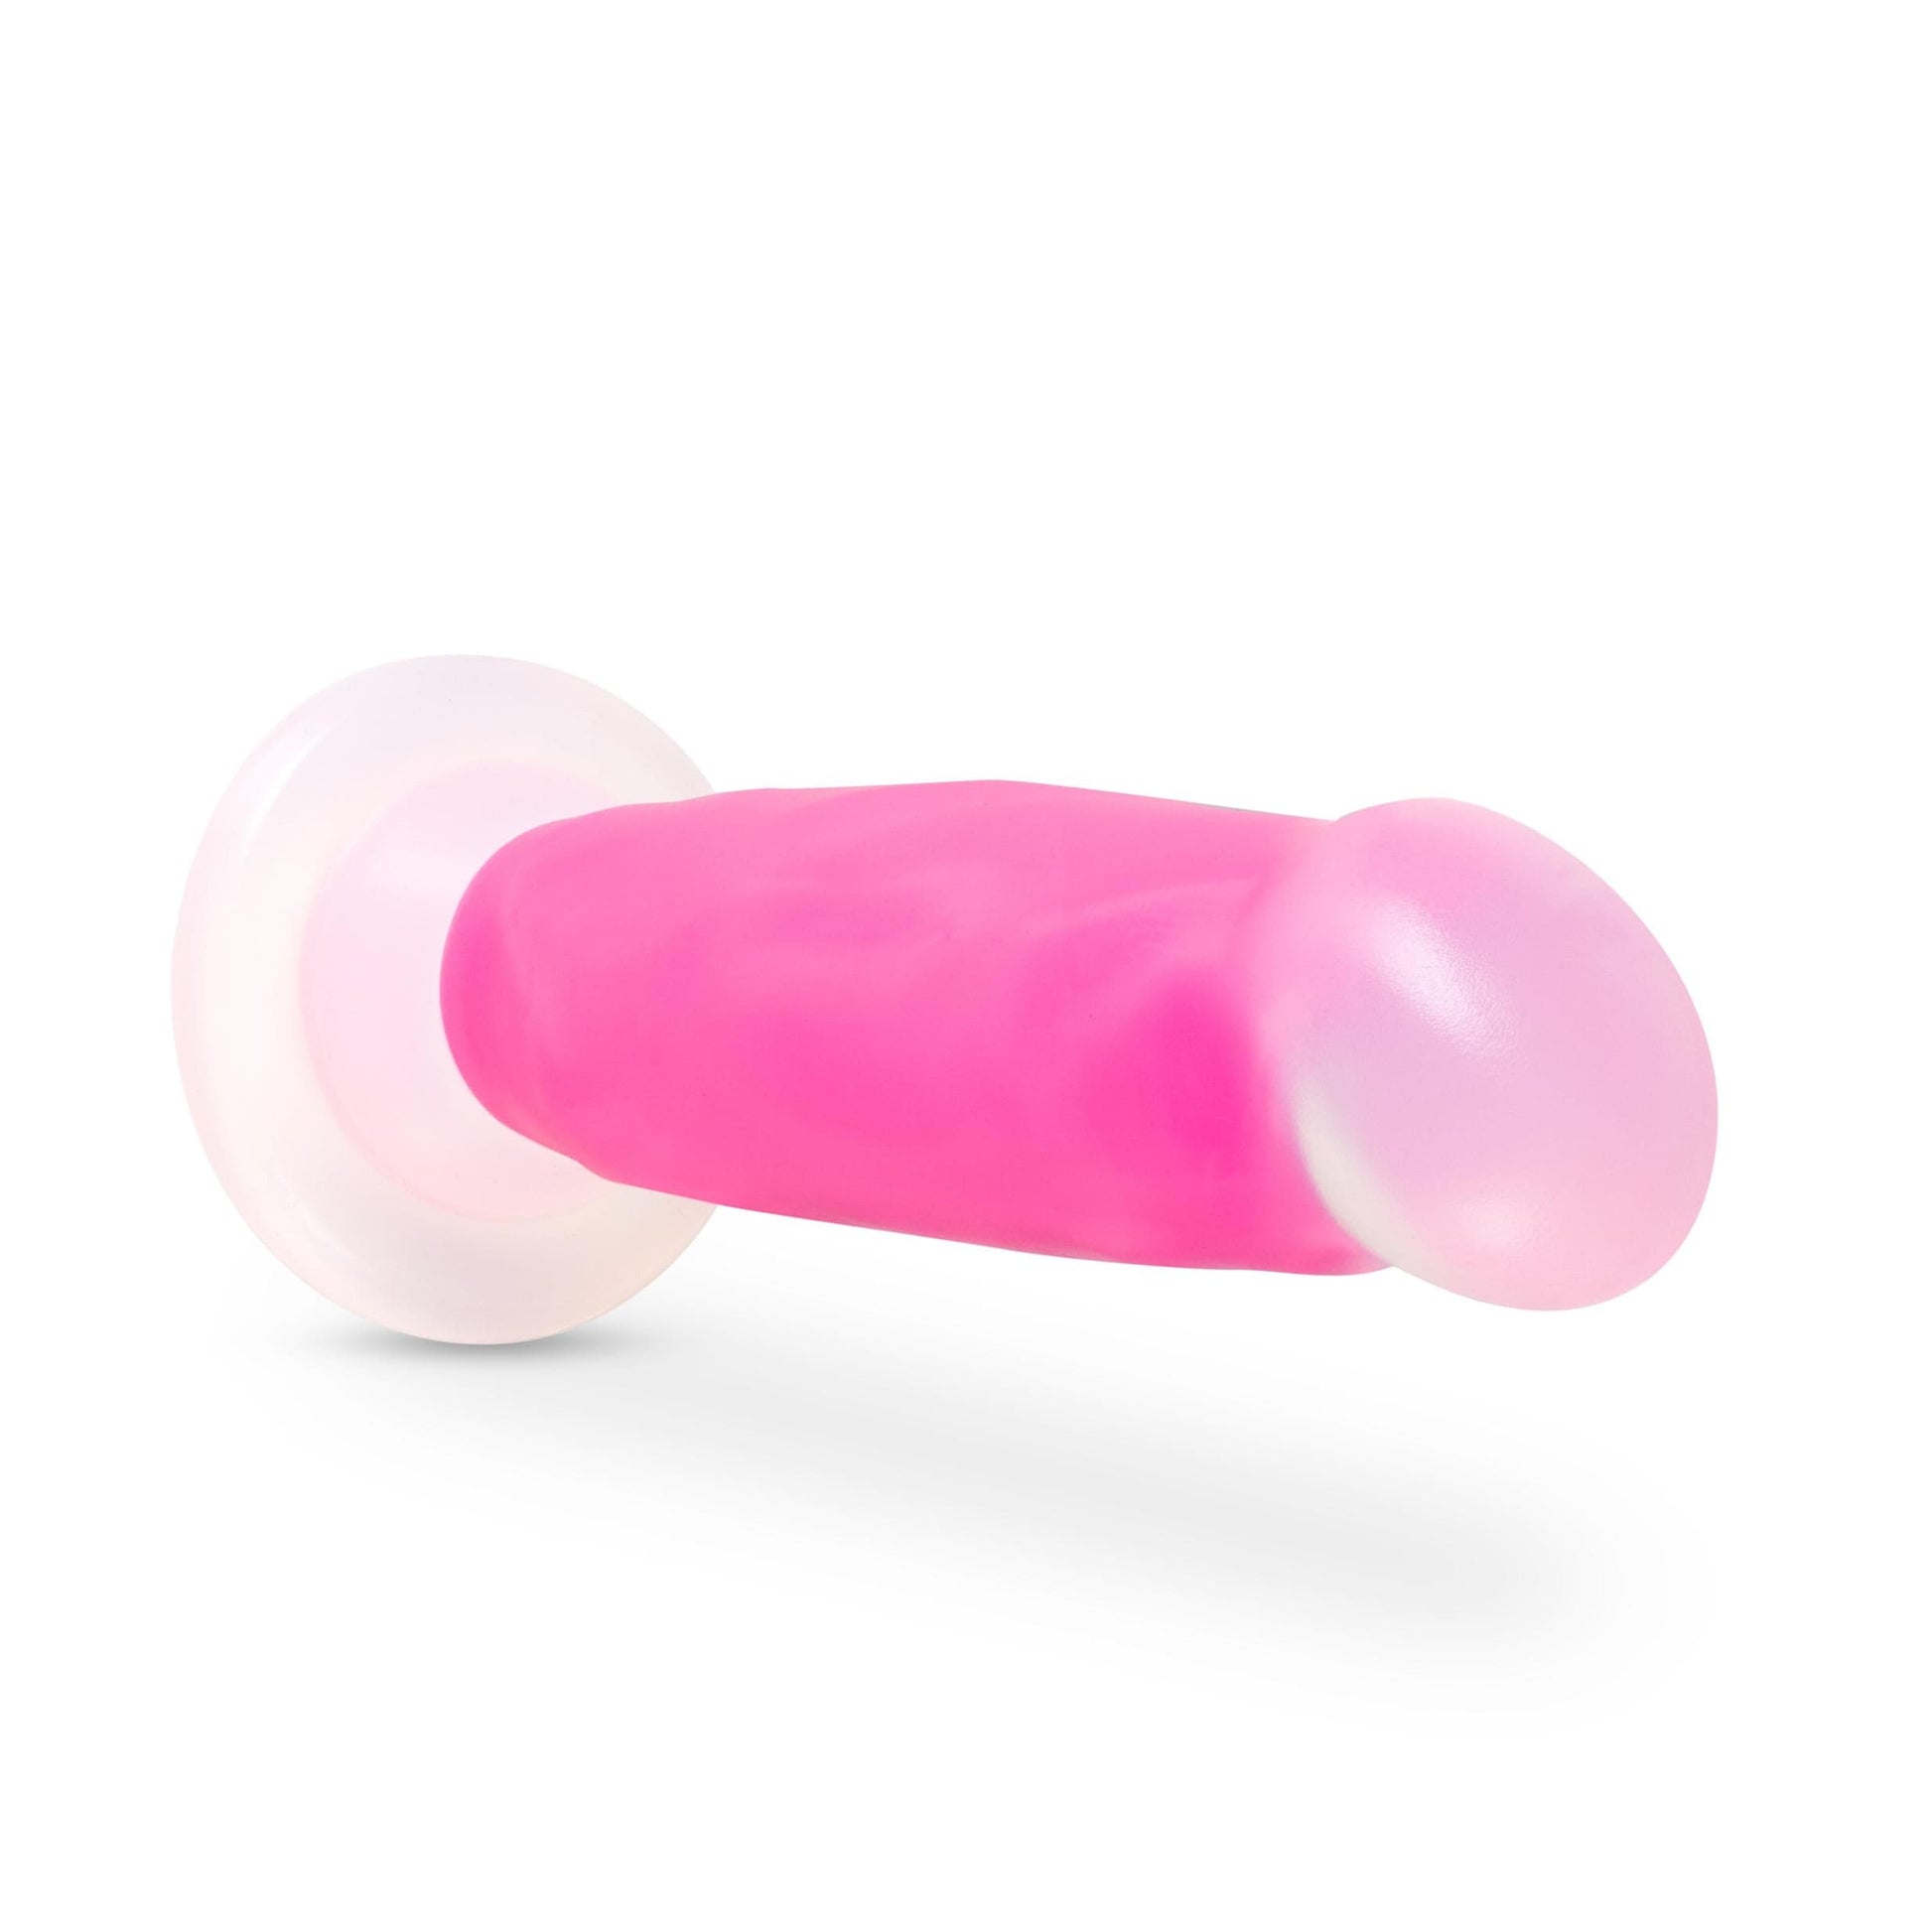 neo elite glow in the dark marquee 8 inch silicone dual density dildo neon pink